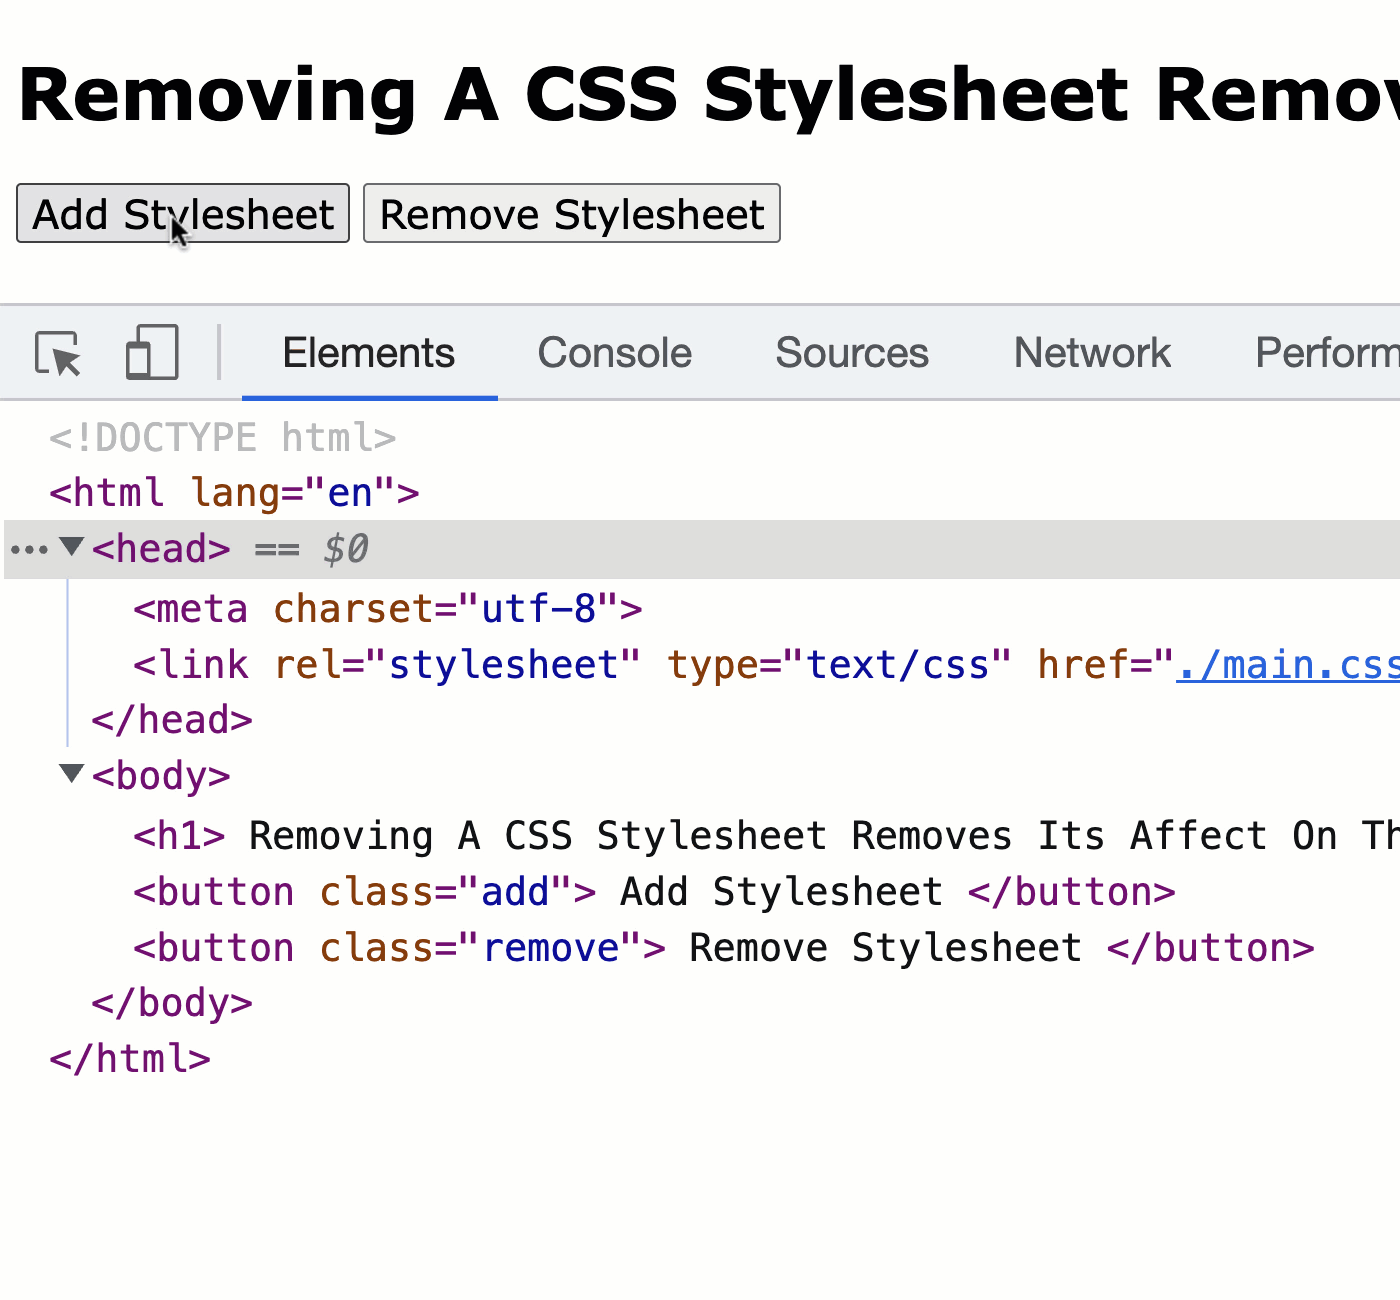 removing-css-stylesheet-removes-affect-on-dom@2x.gif